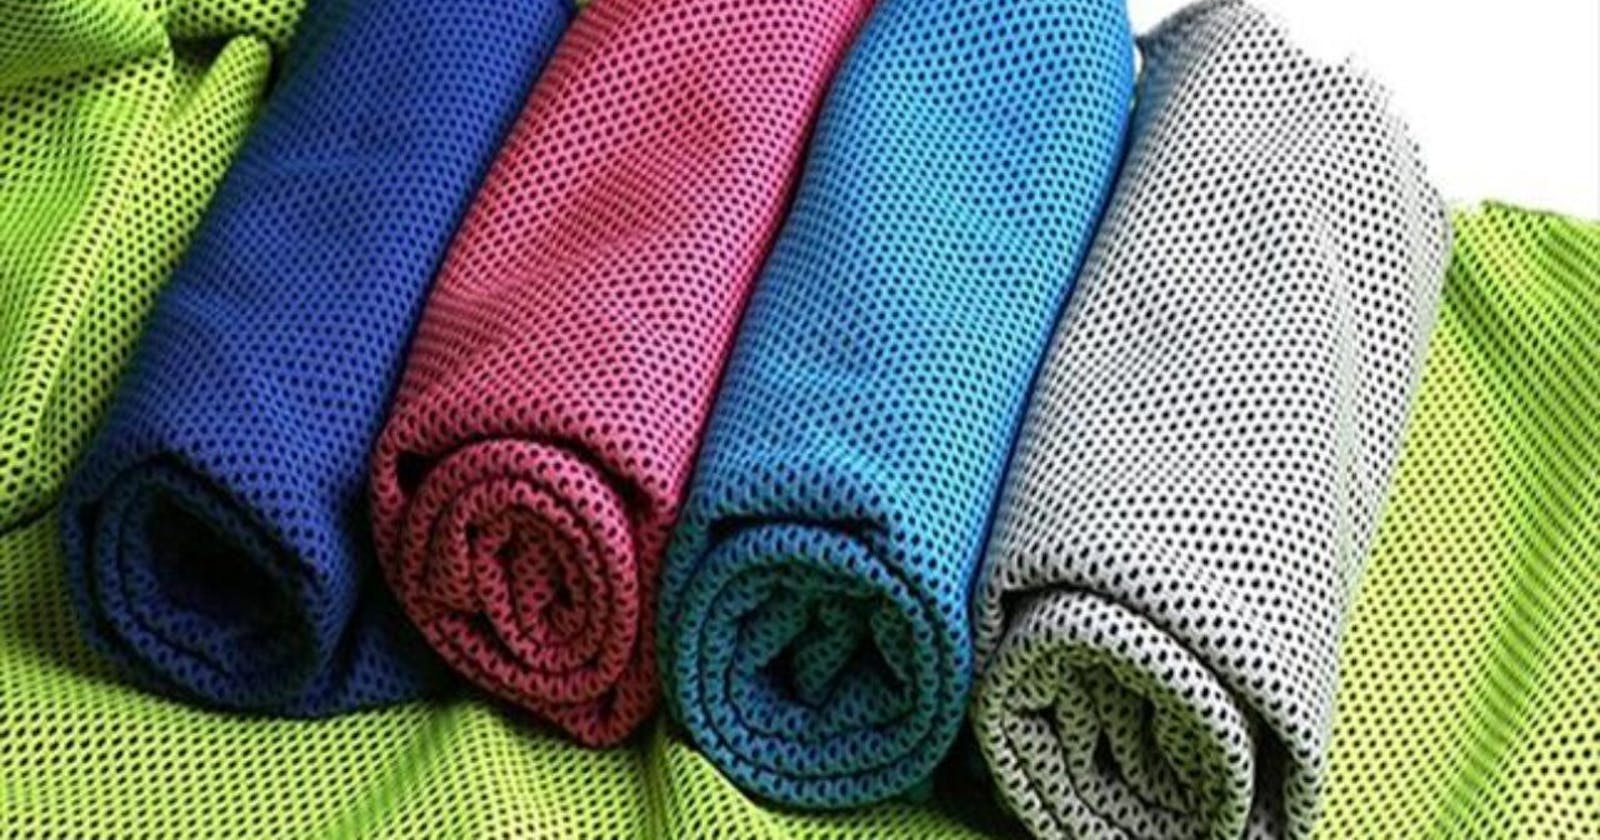 Cooling Fabrics Market Report 2021-26: Demand, Trends, Scope, Opportunity and Forecast